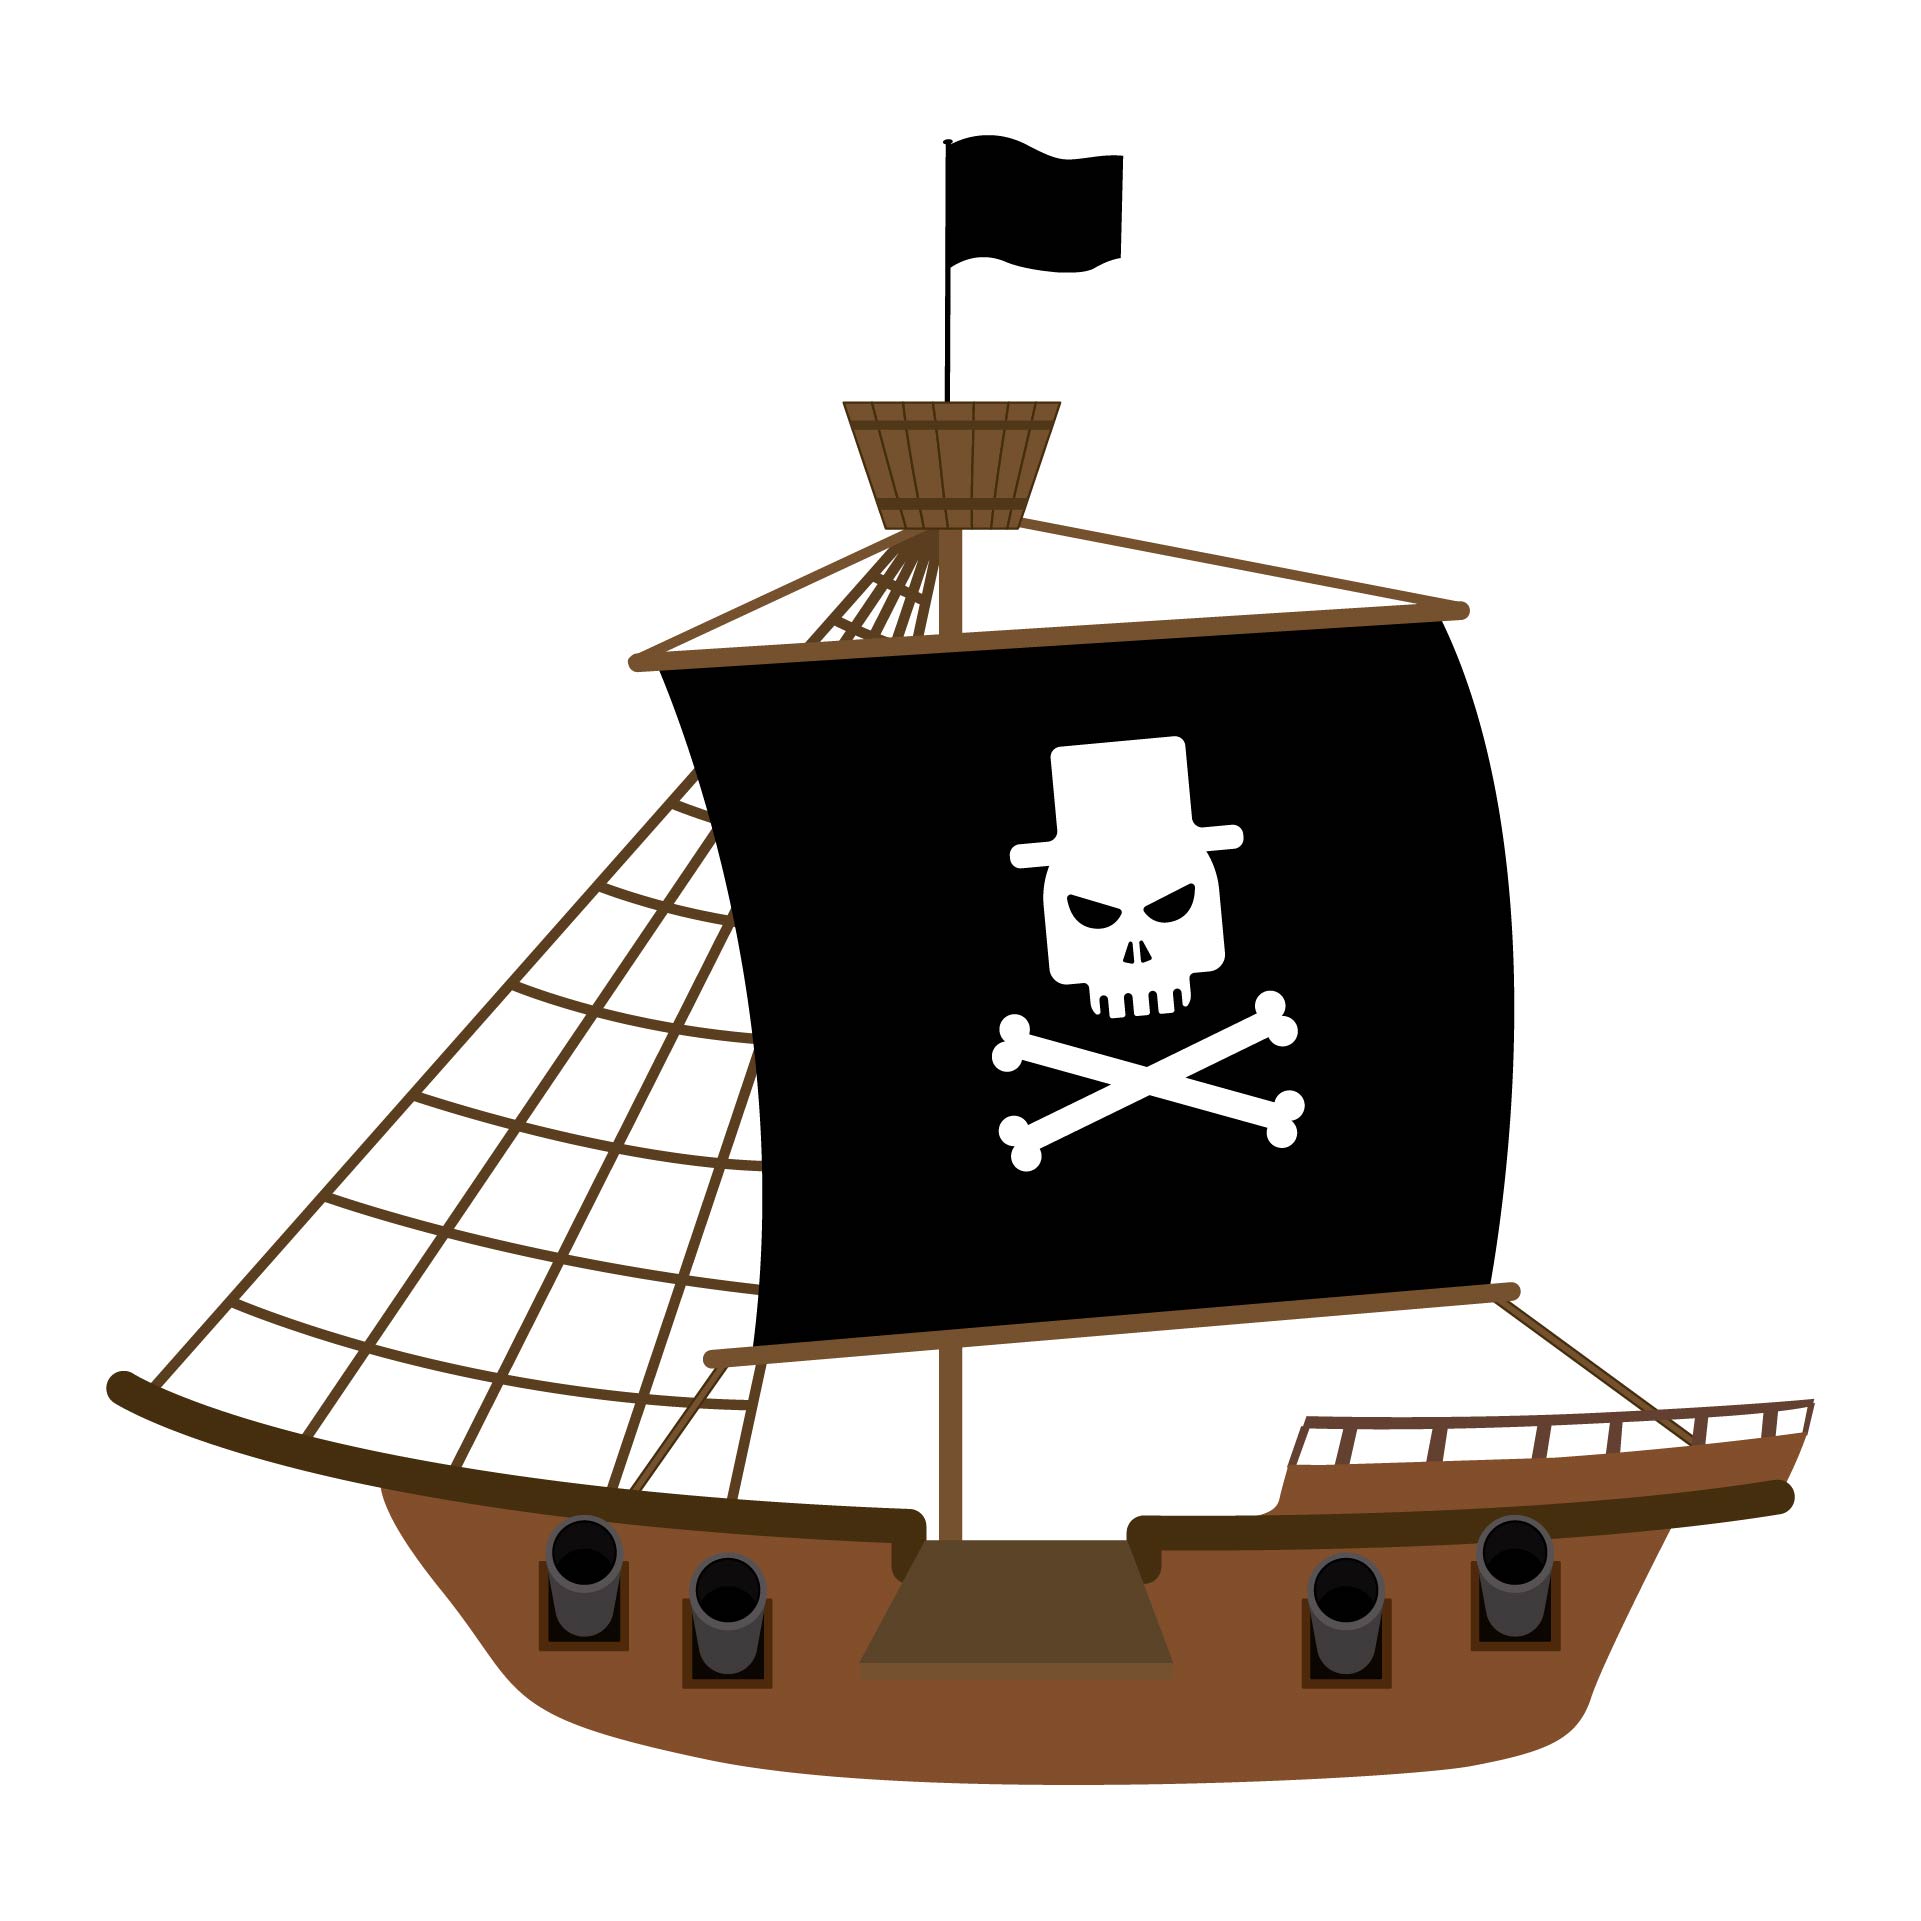 Printable Pirate Ship With Skull With Crossed Bones On The Sail